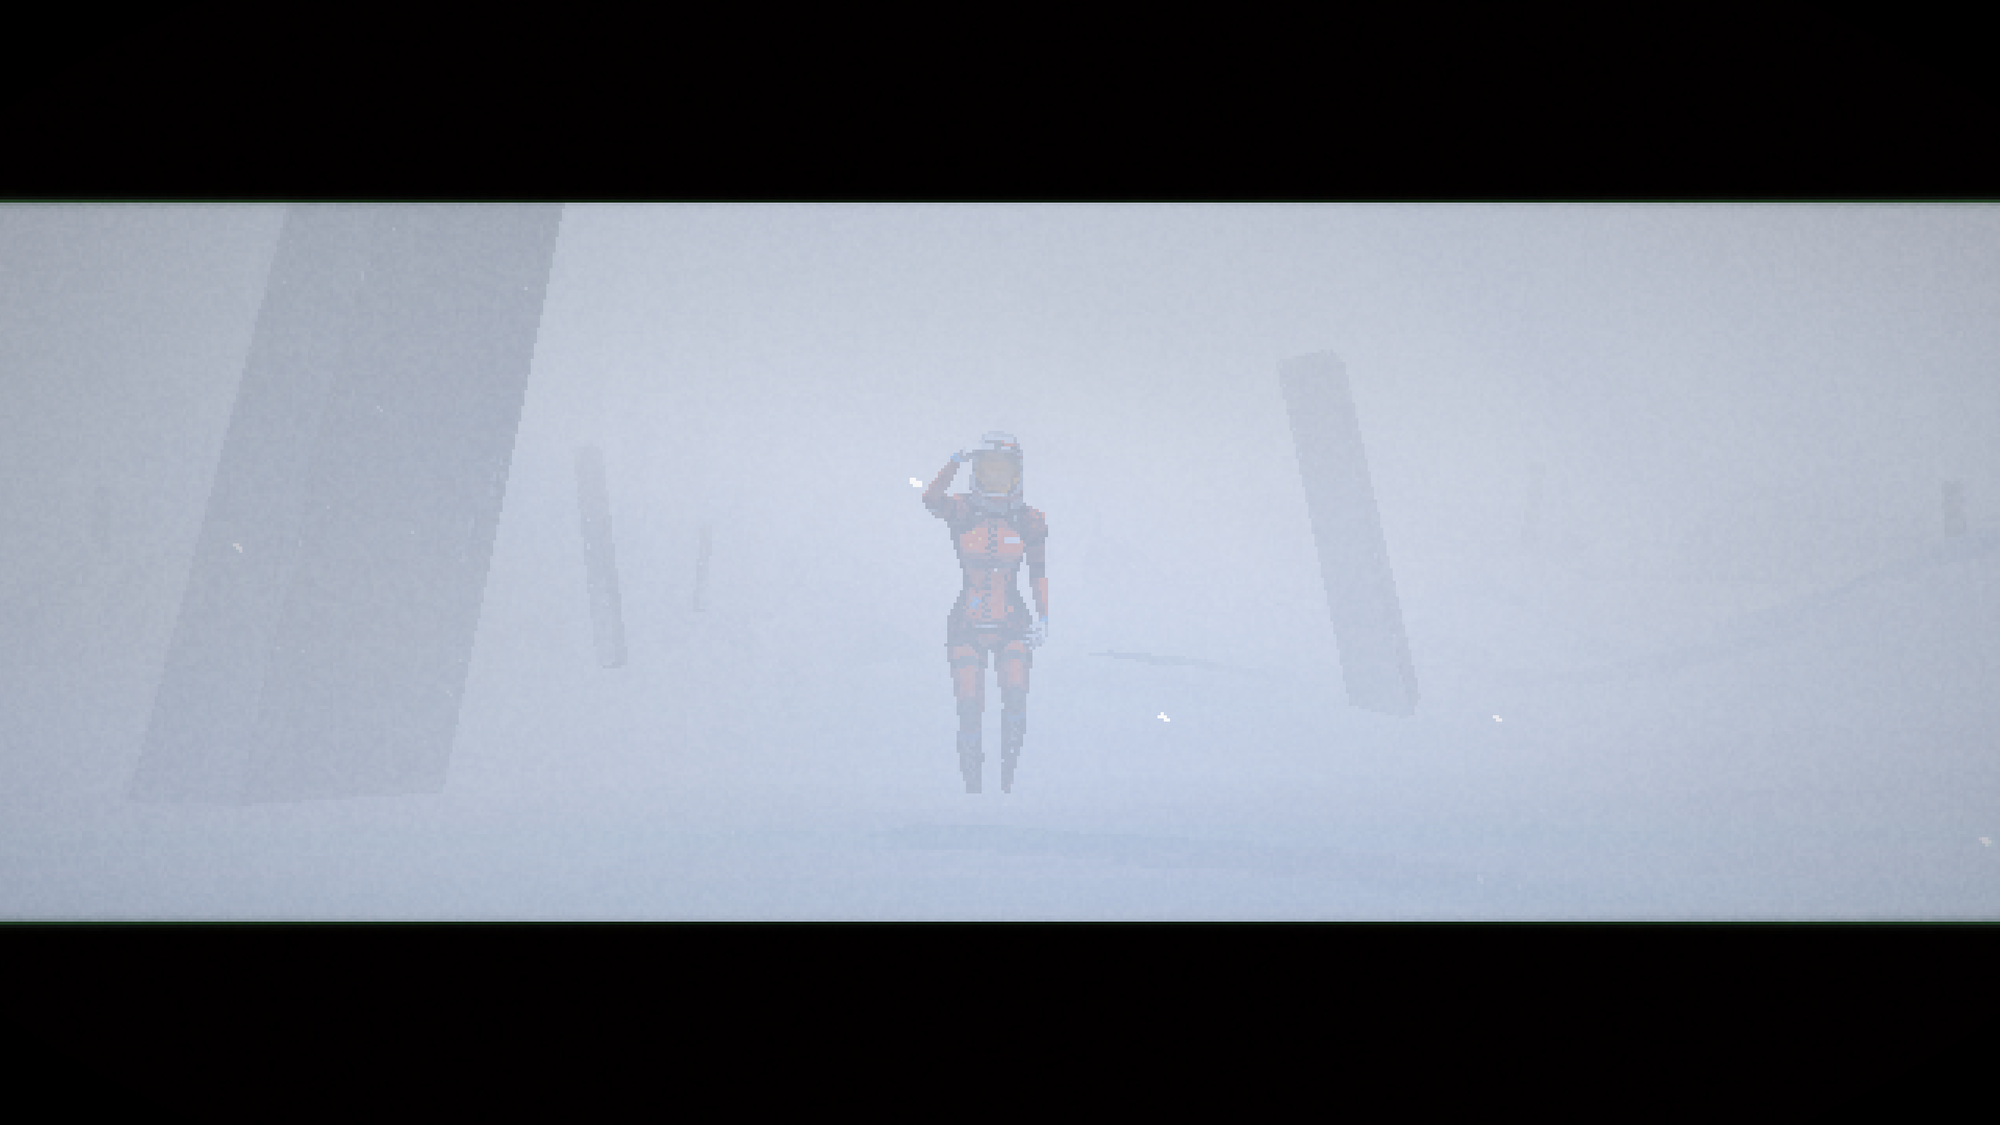 Screenshot of Elster in a space suit walking through the snow filled alien environment